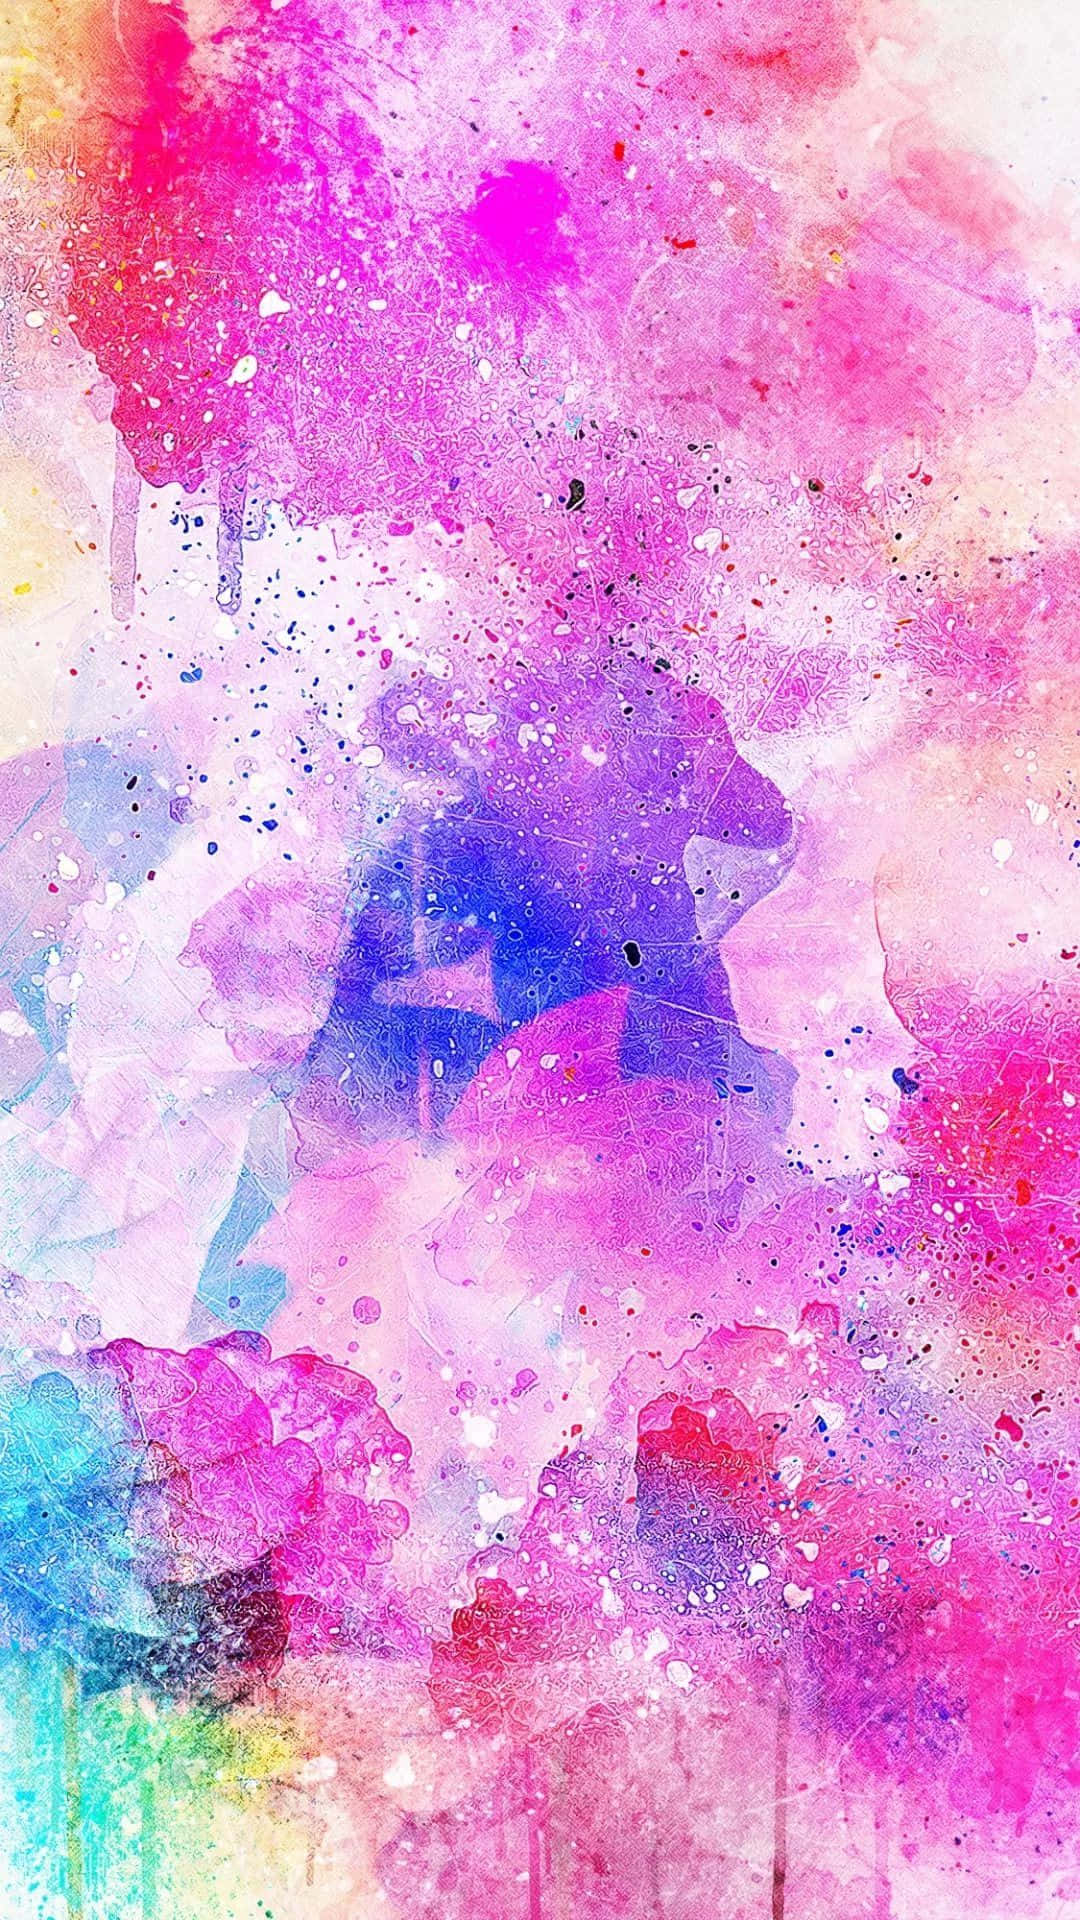 Watercolor Splatters On A White Background Wallpaper